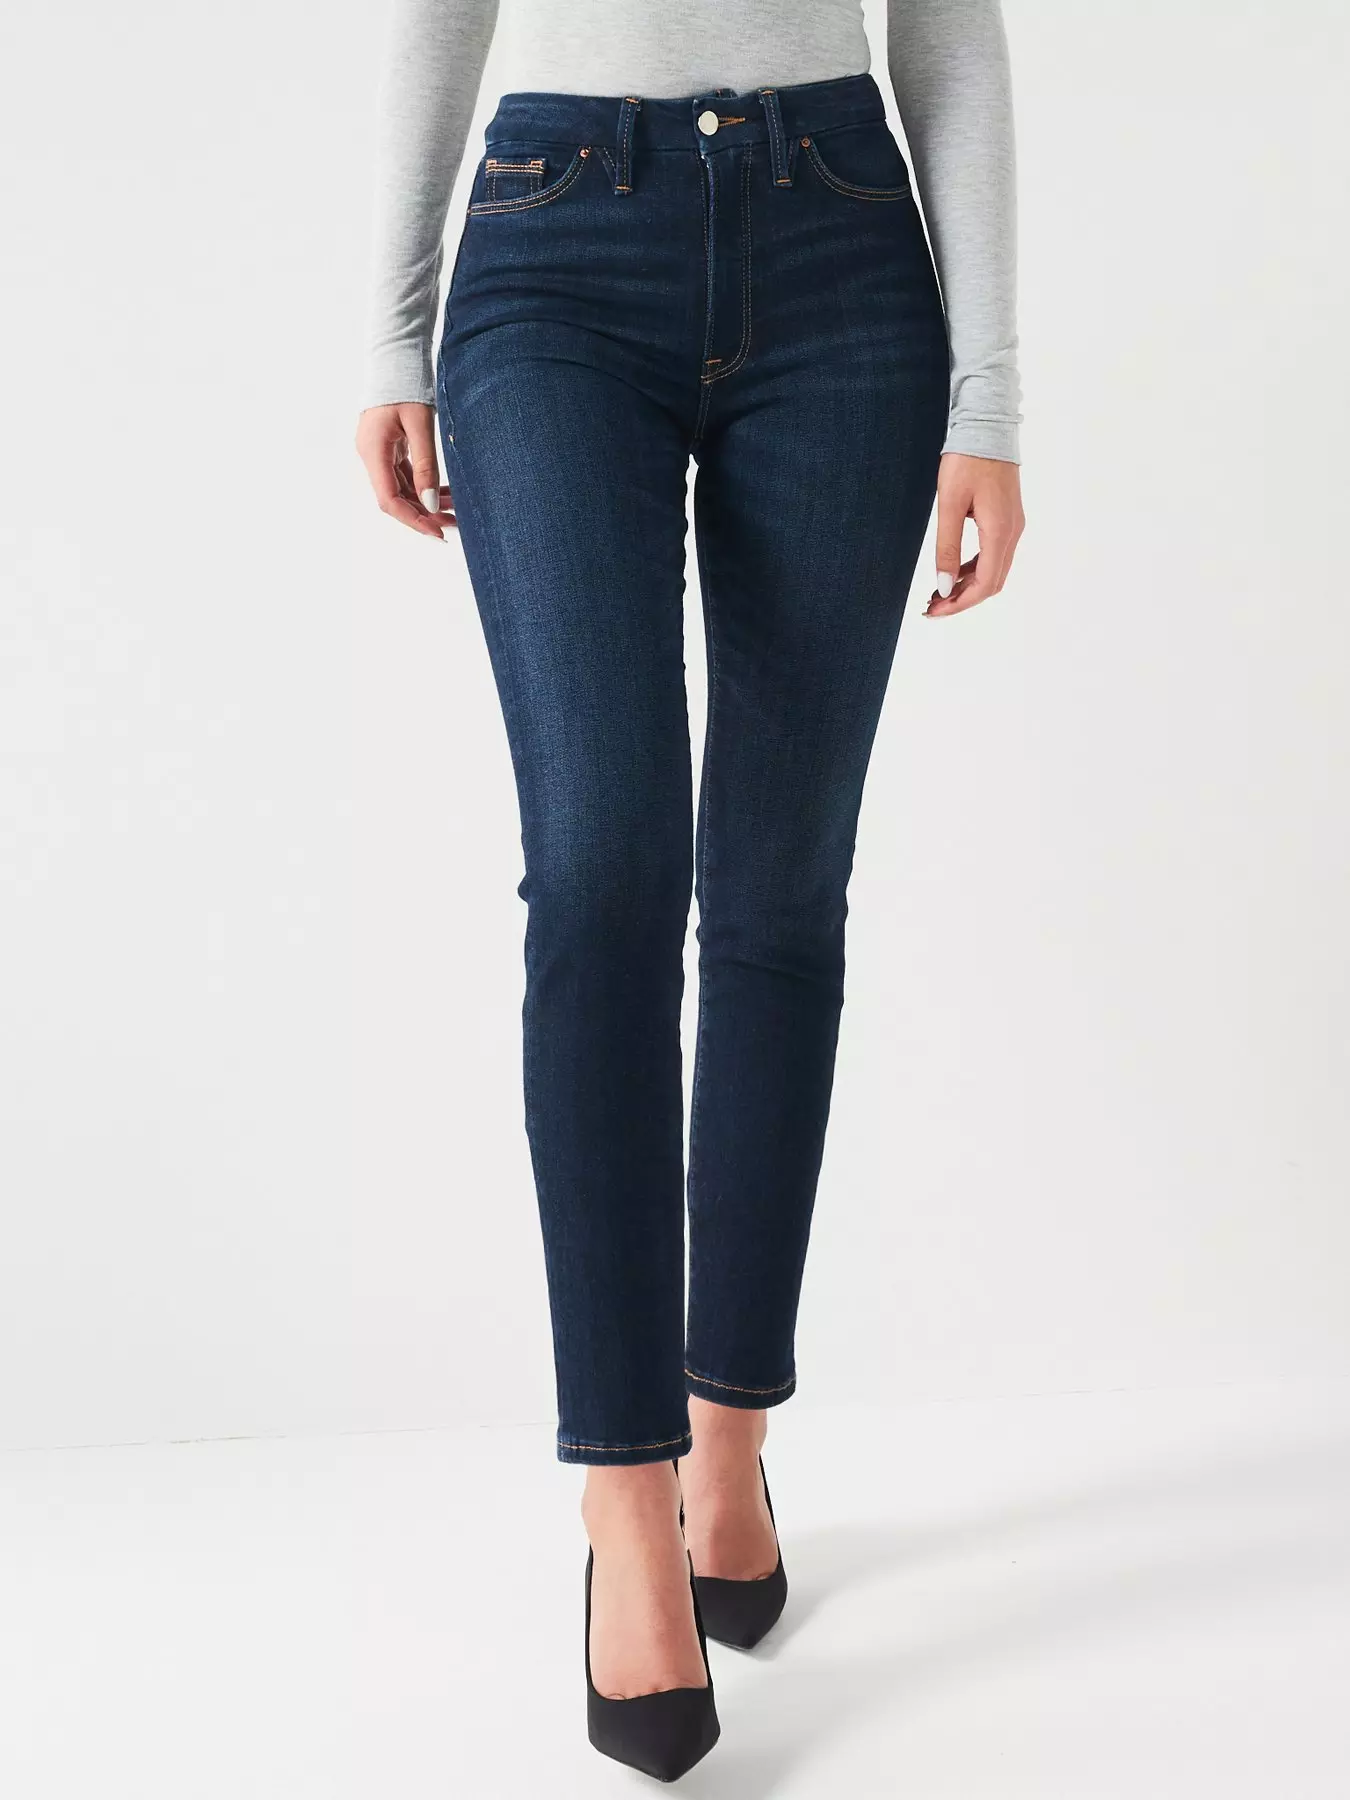 CURVE APPEAL Tummy Tucking High Rise Comfort Waist Skinny Jeans